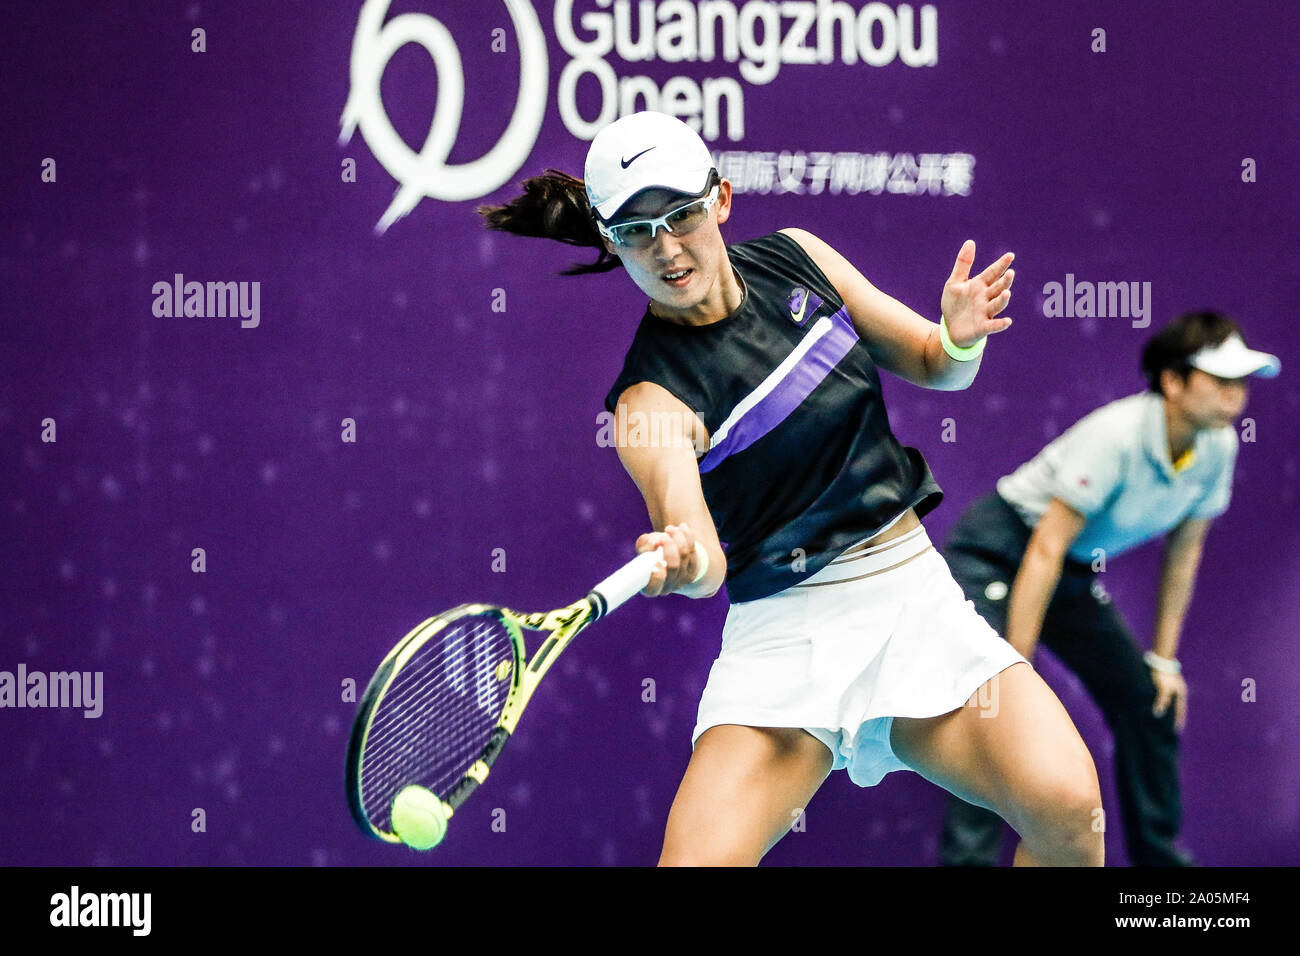 Chinese professional tennis player Zheng Saisai plays against Italian  professional tennis player Jasmine Paolini at the first round of WTA  Guangzhou Open 2019 in Guangzhou city, south China's Guangdong province, 18  September